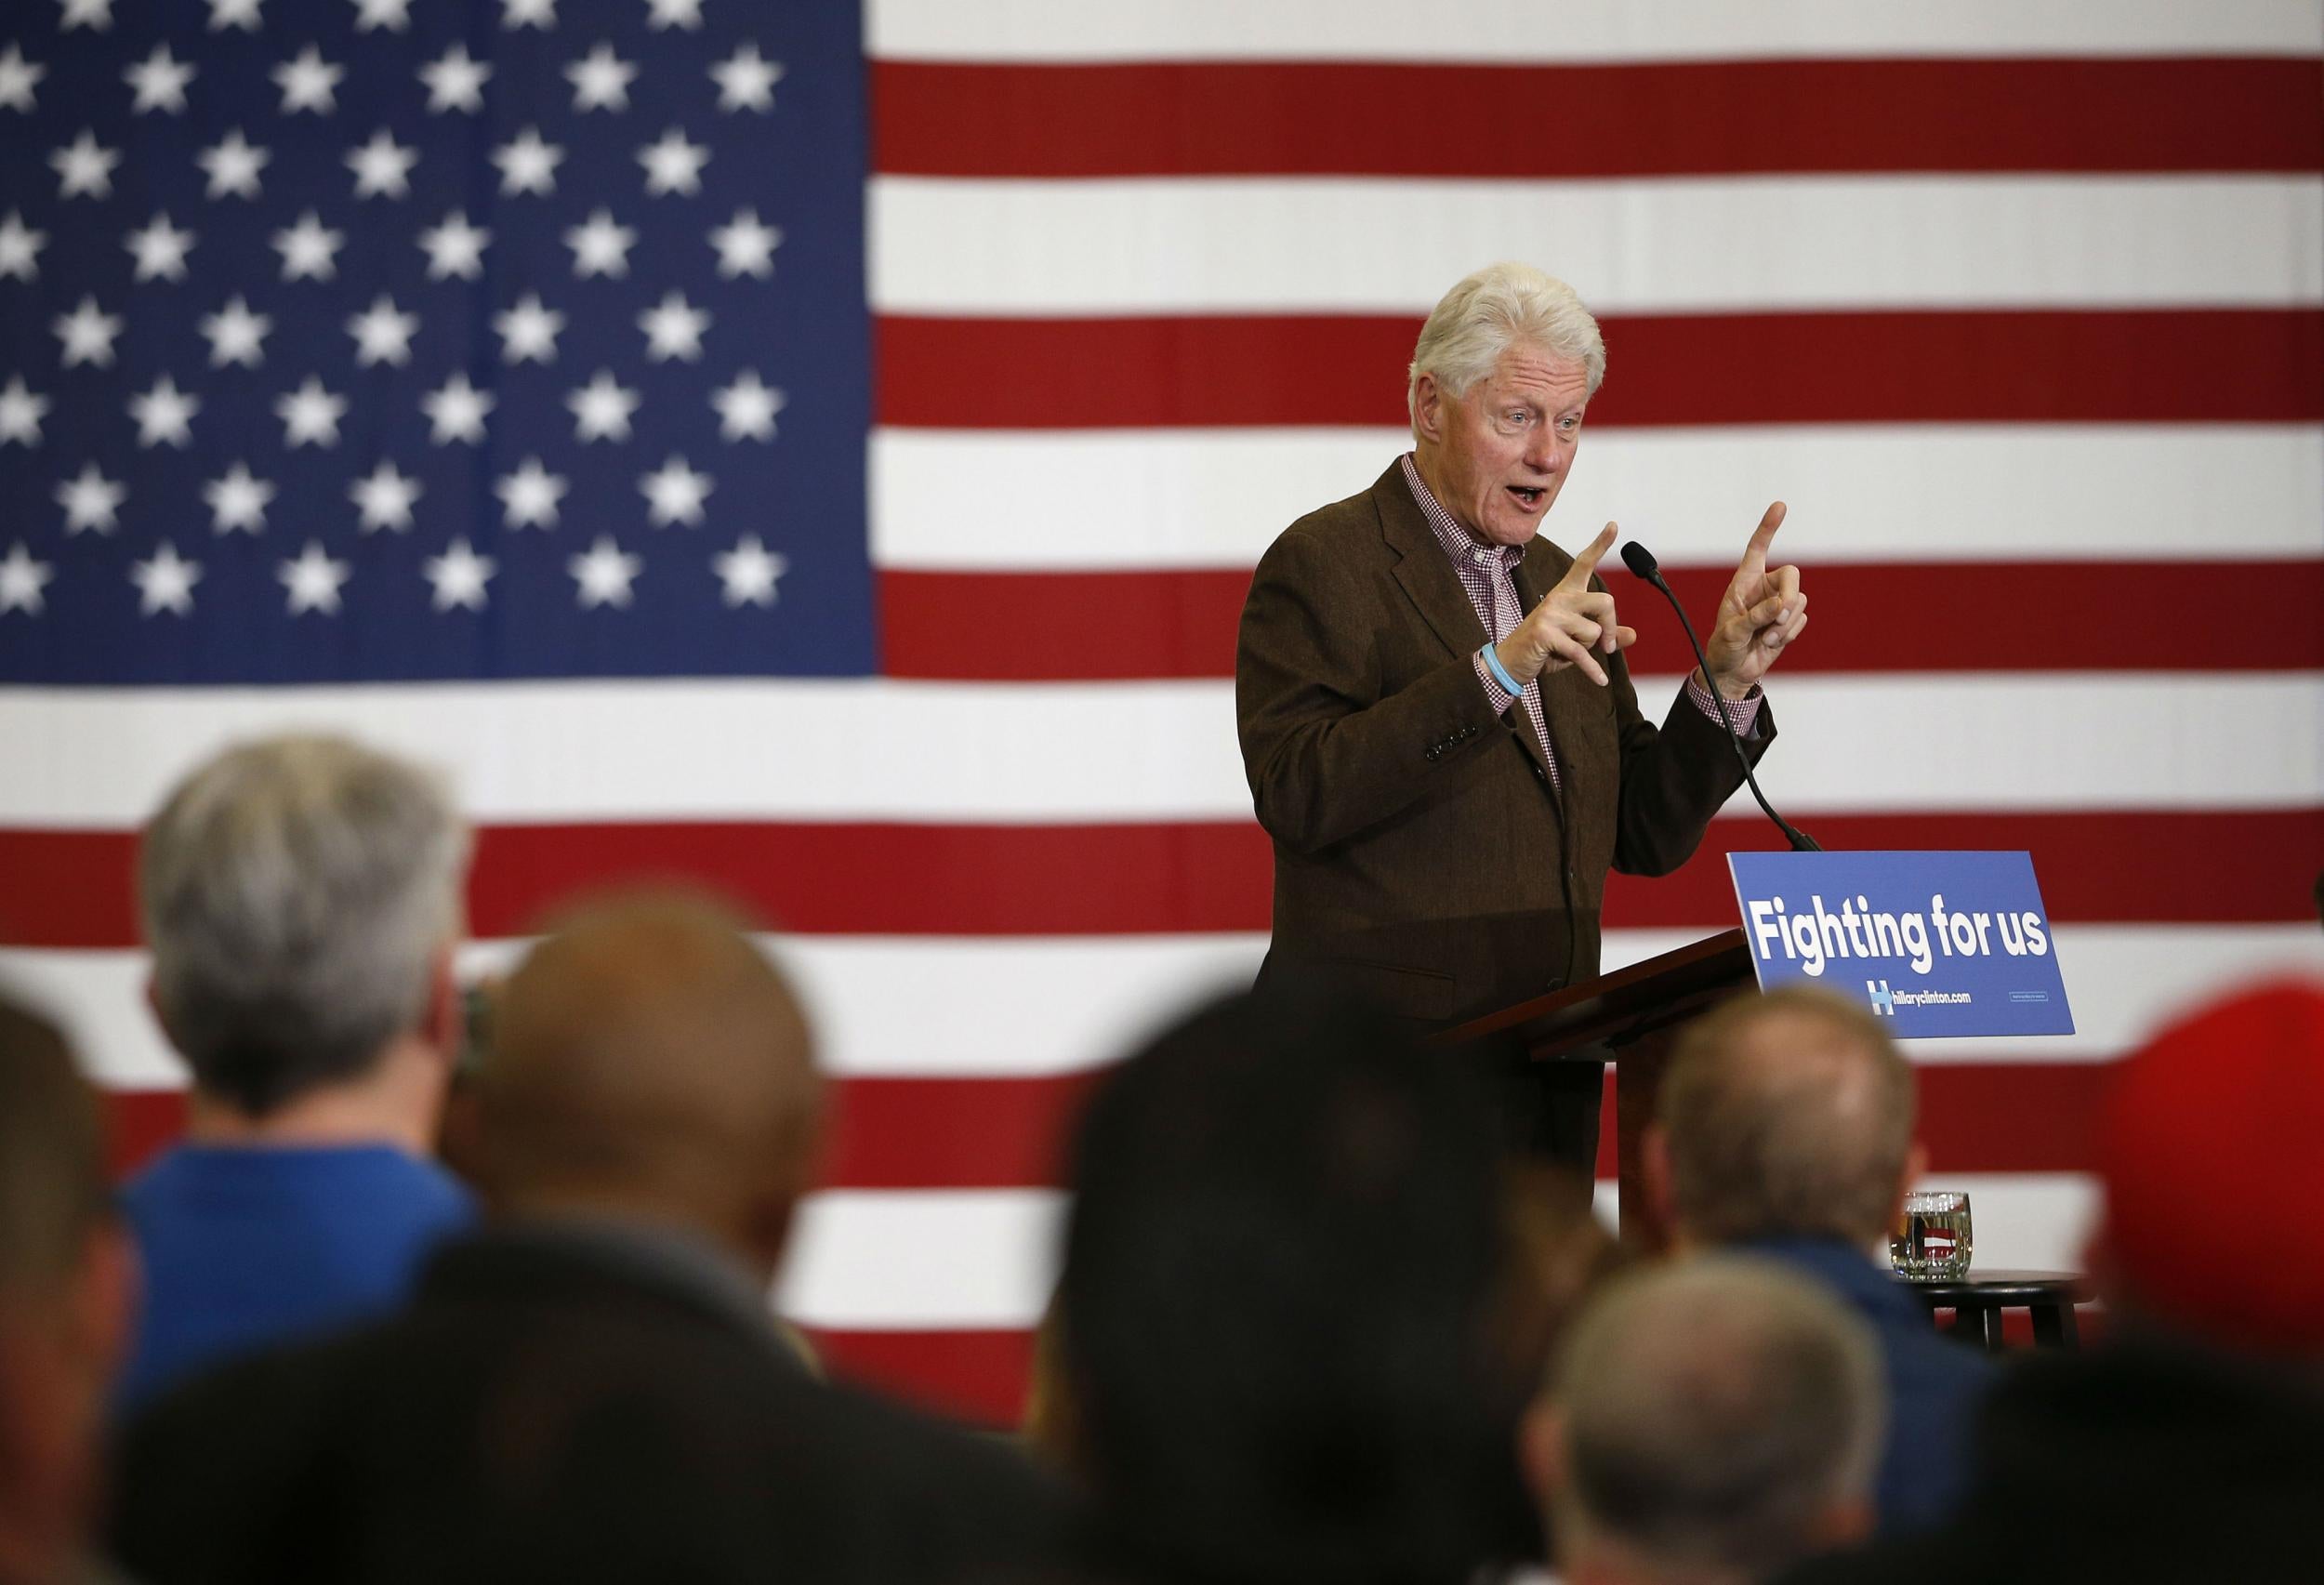 Bill Clinton launched a stinging attack on Bernie Sanders